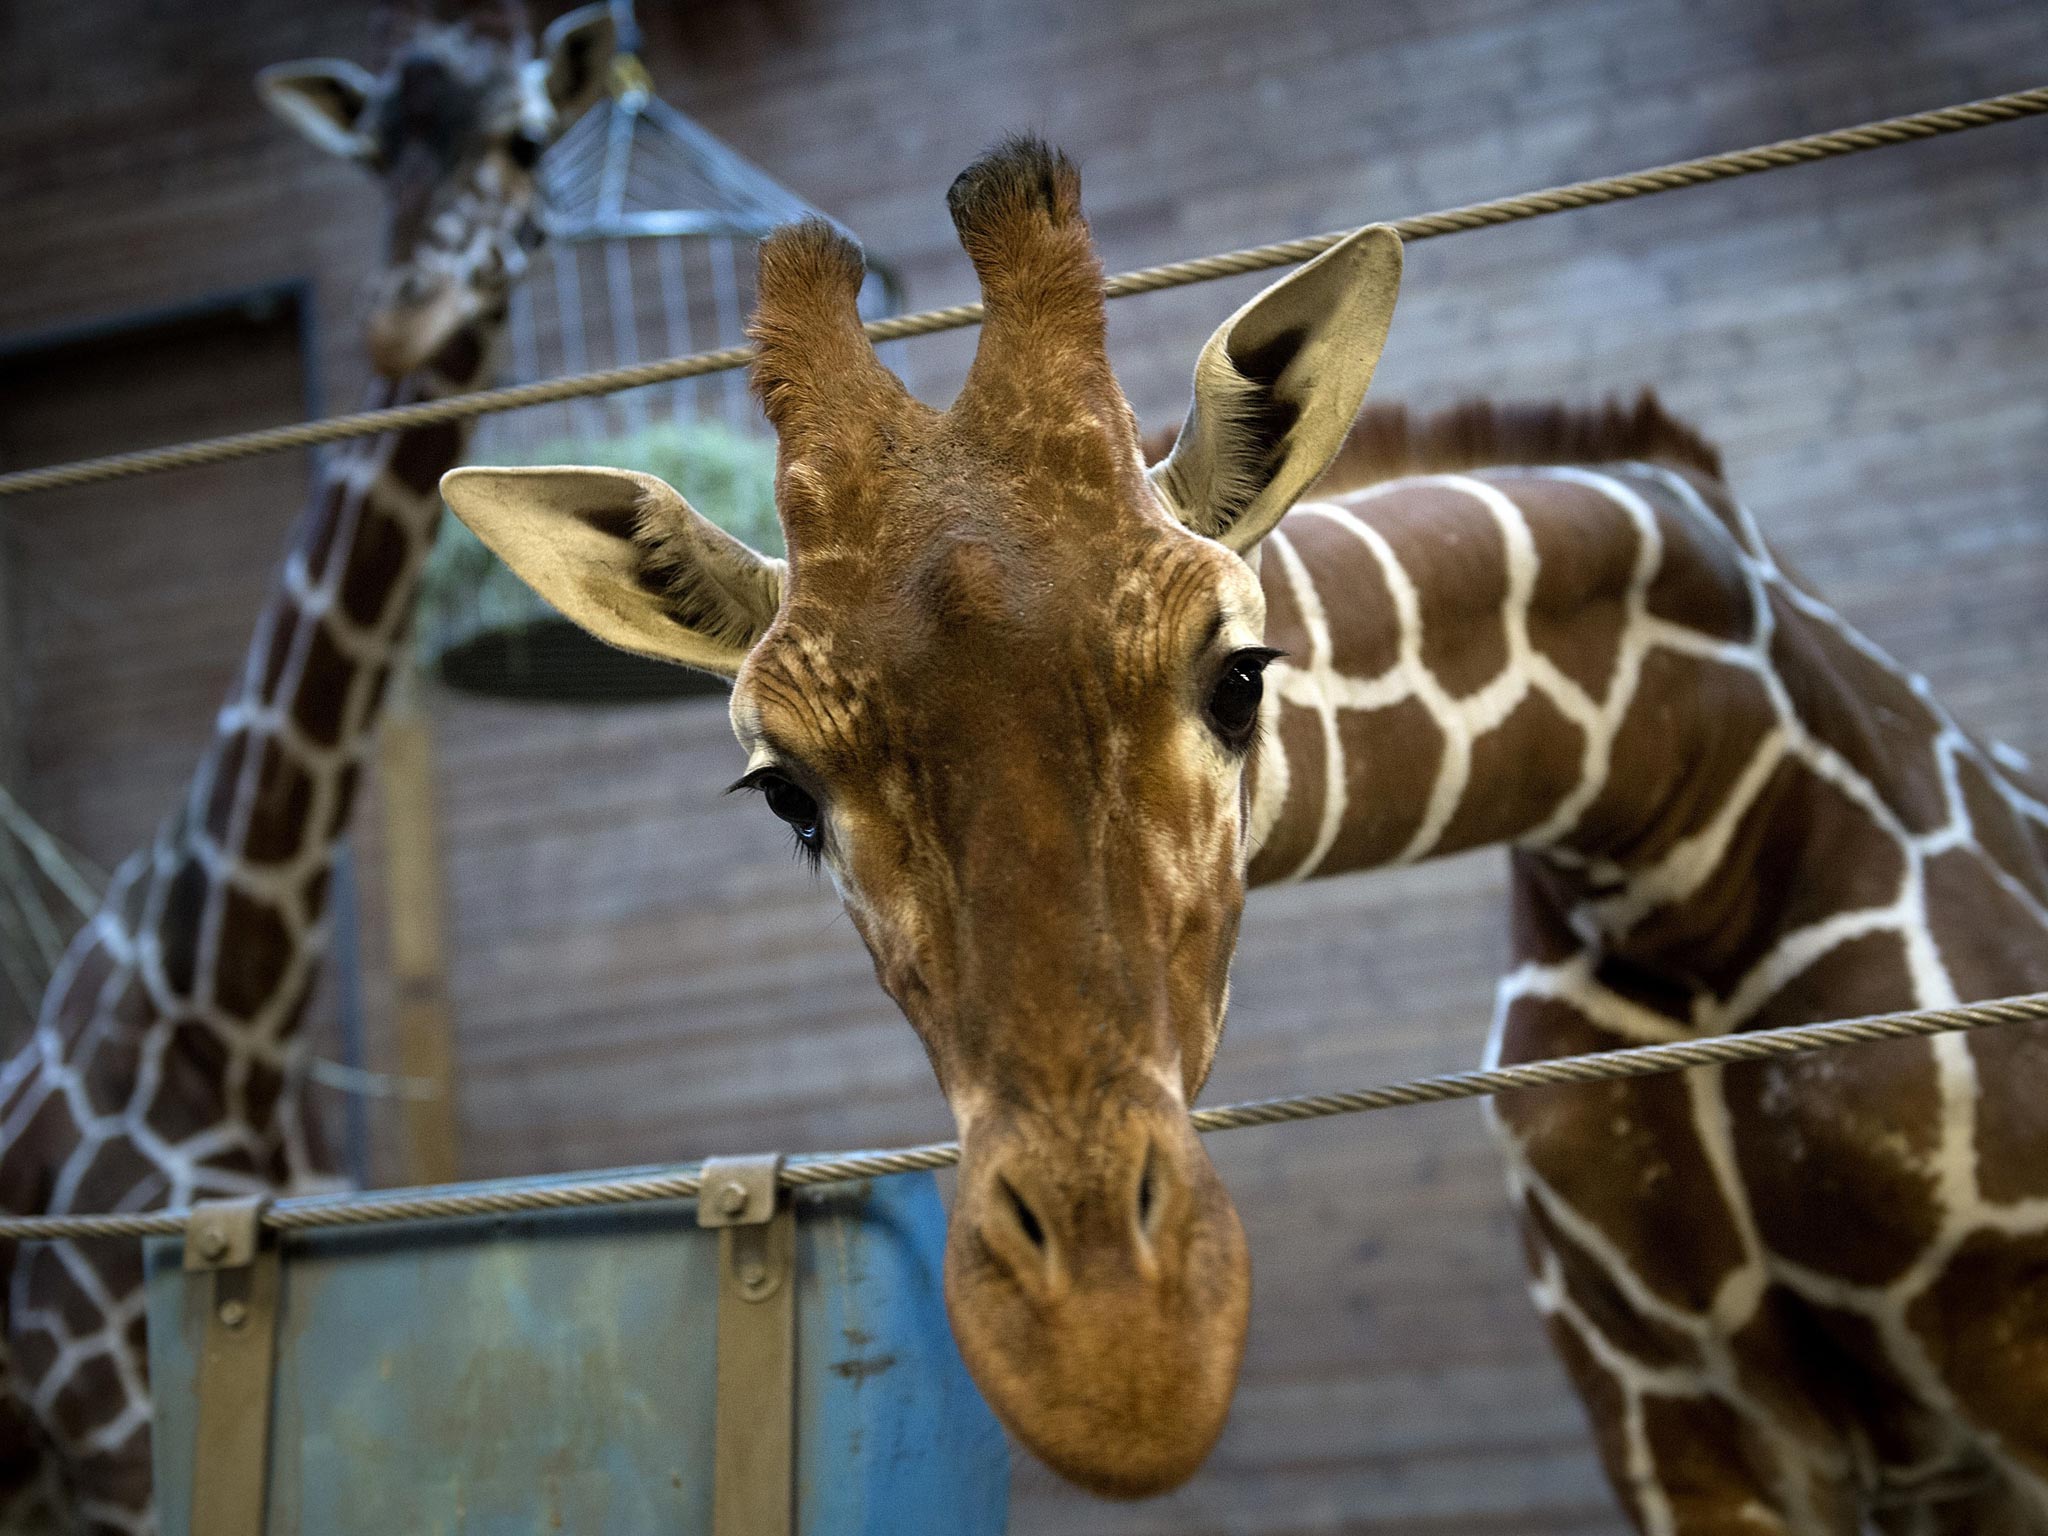 Marius who was shot dead and autopsied in the presence of visitors to the gardens at Copenhagen zoo